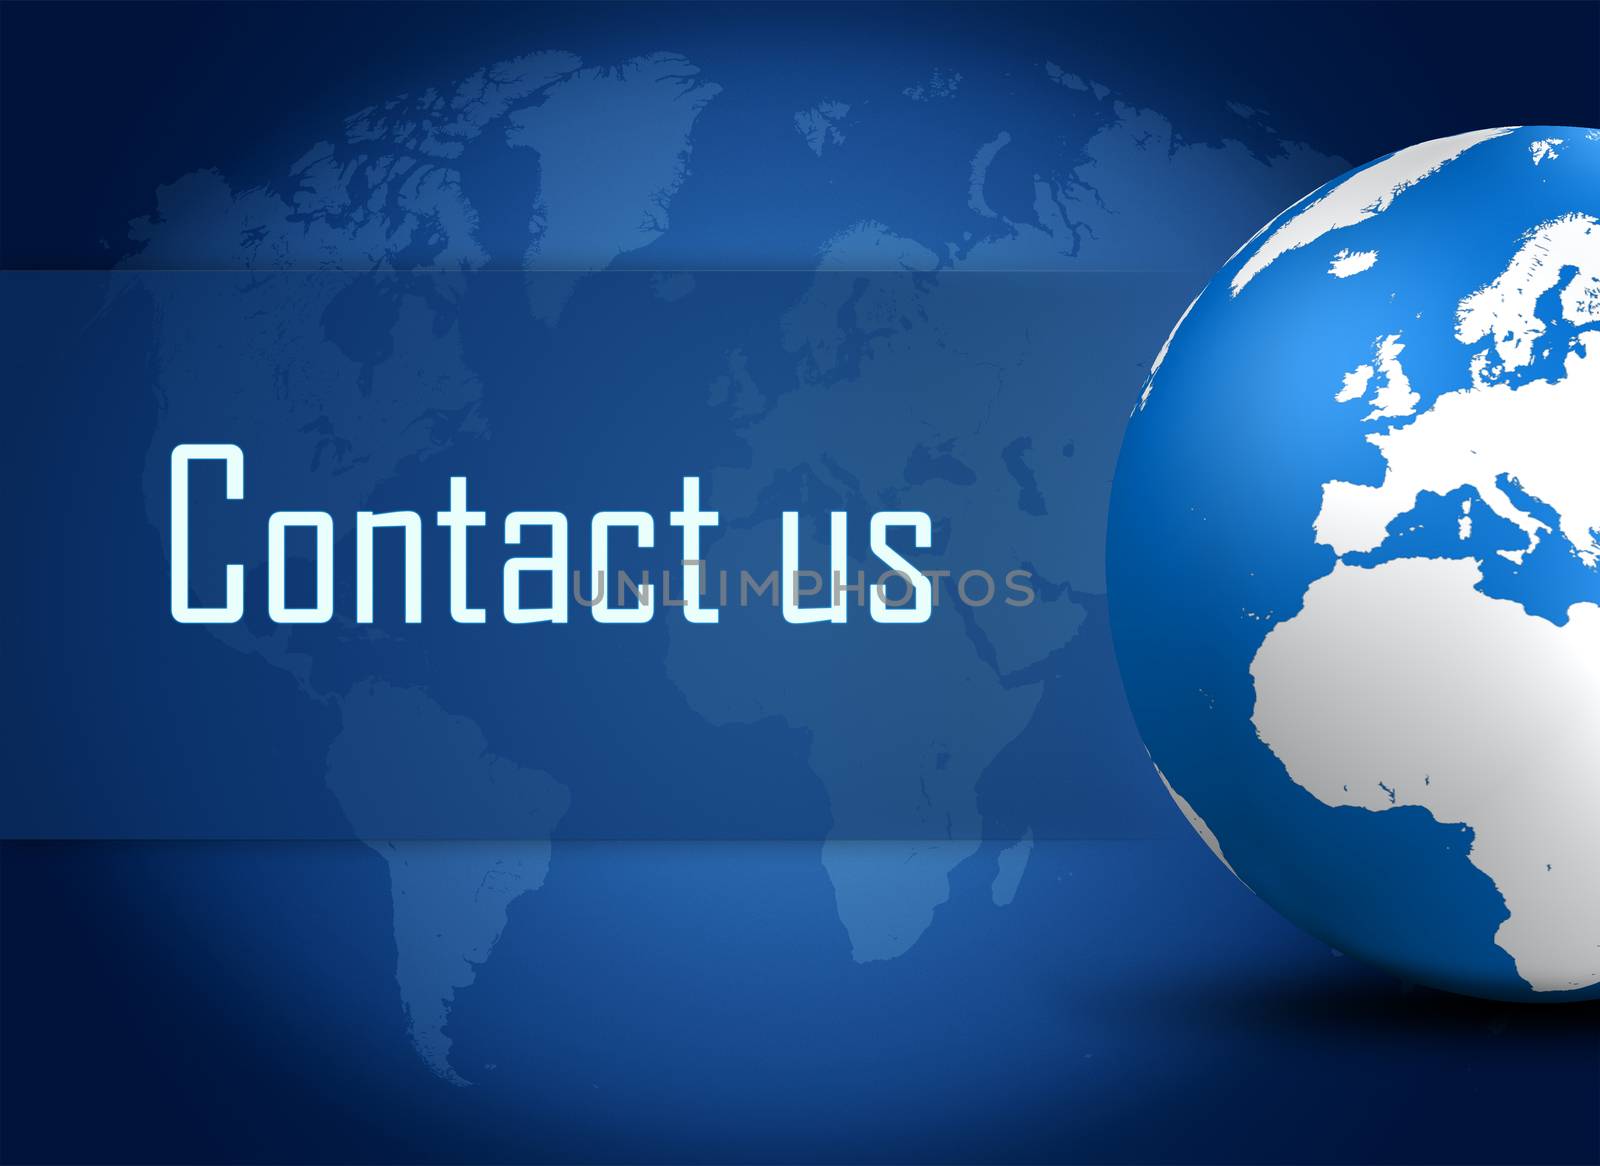 Contact us concept with globe on blue world map background